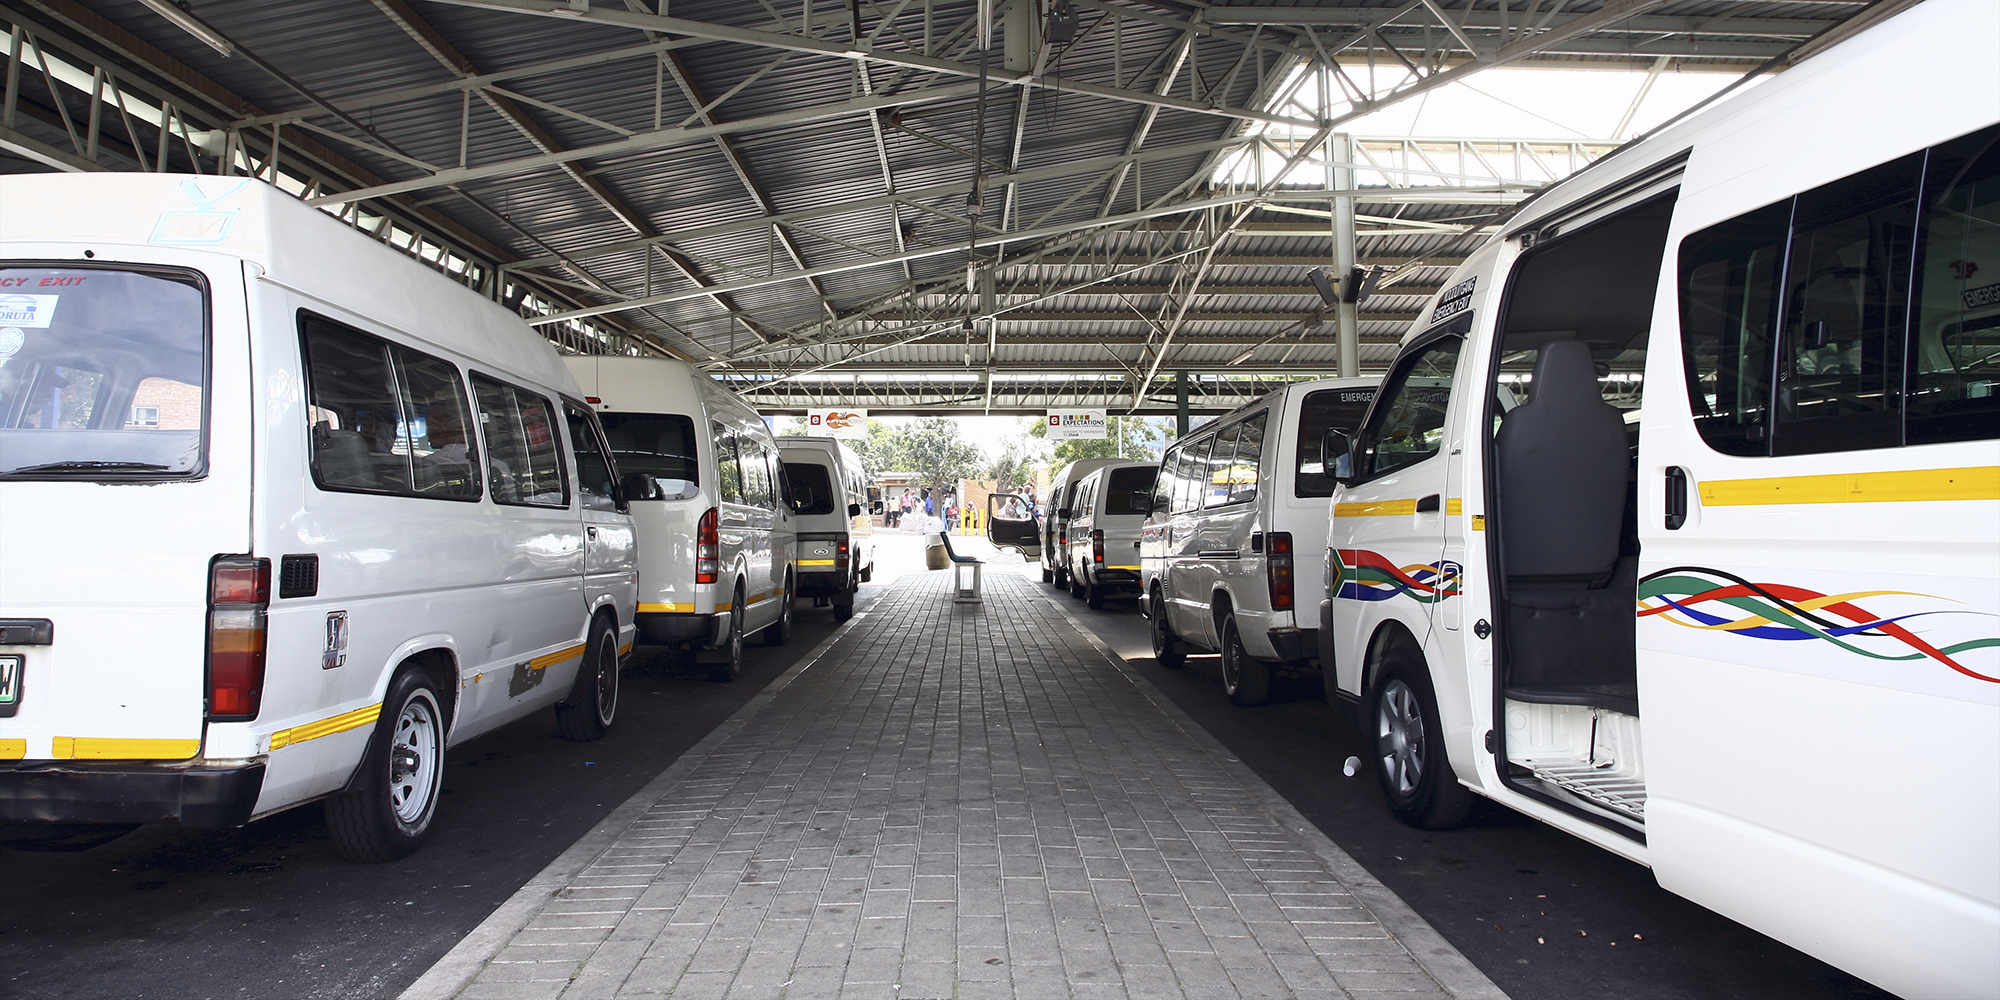 The Commission of Inquiry into Taxi Violence continues on 15 October 2020